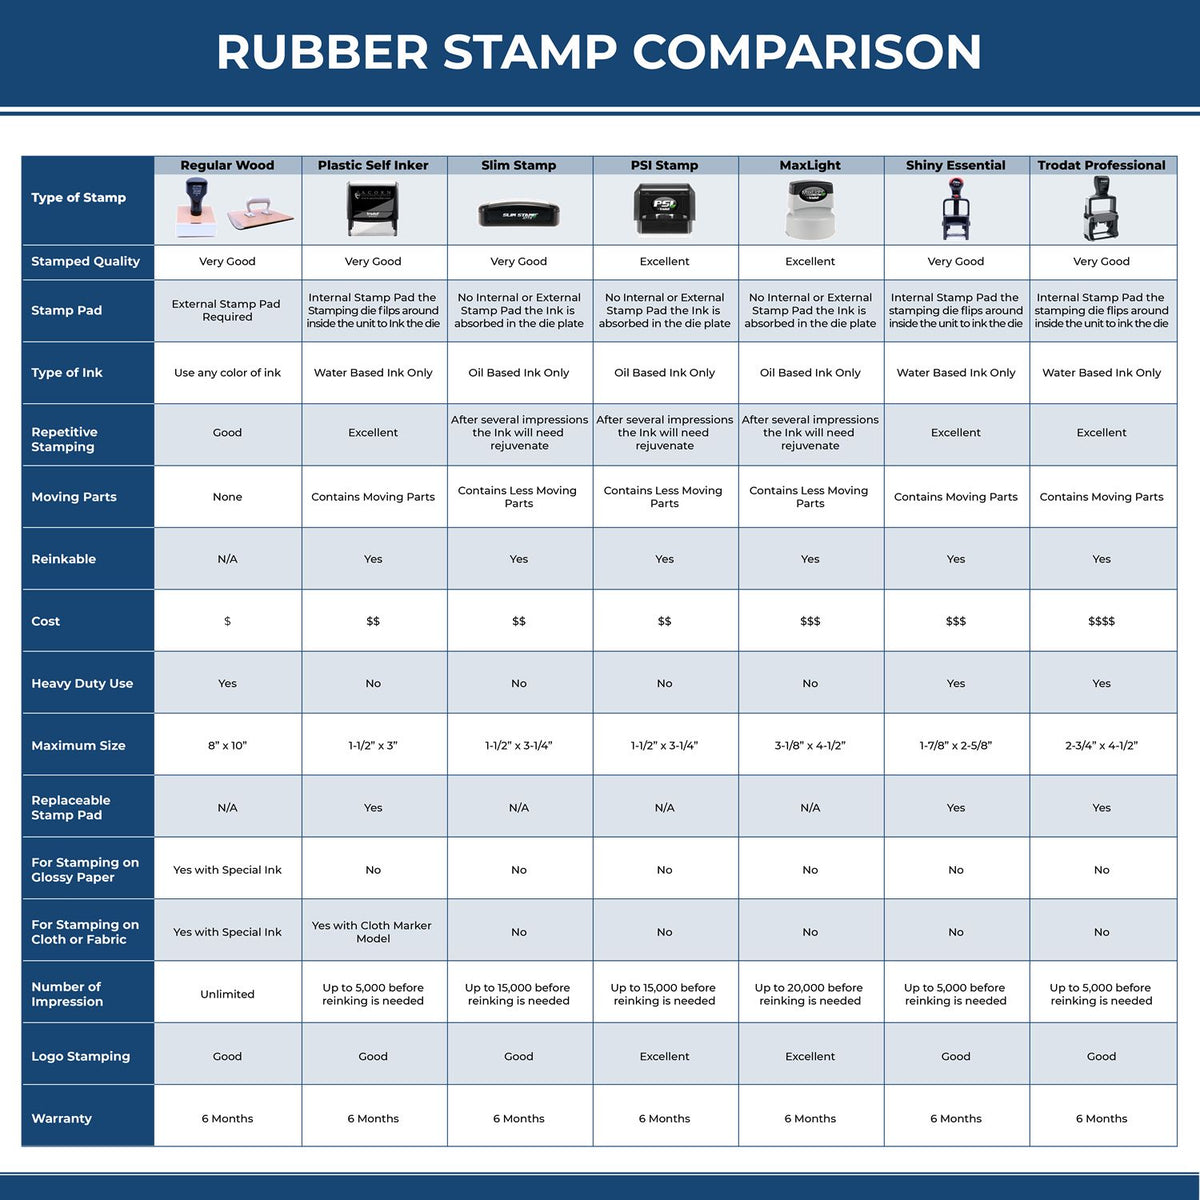 A comparison chart for the different types of mount models available for the Wooden Handle Maryland Rectangular Notary Public Stamp.